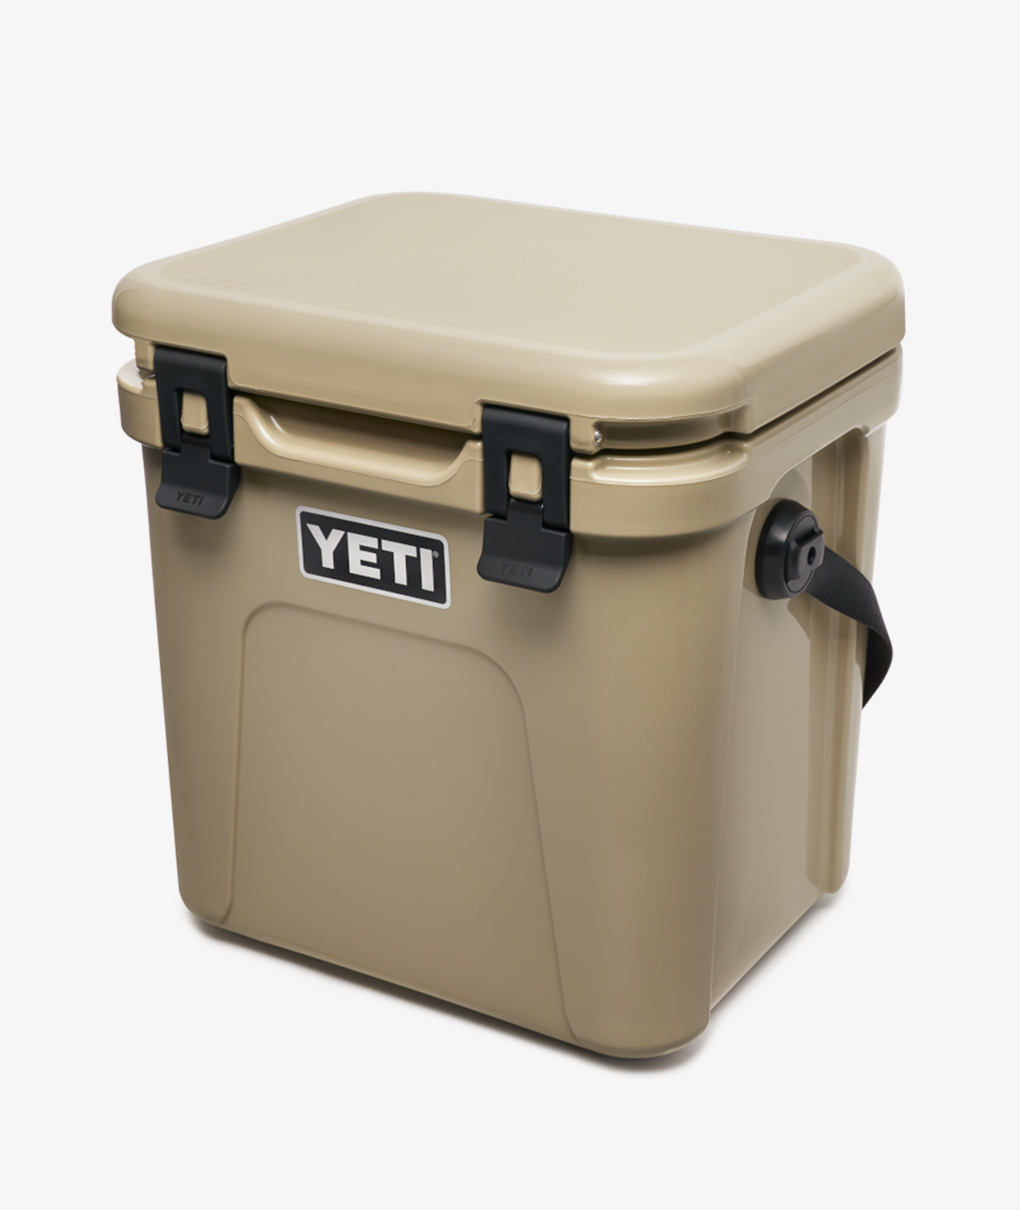 Norse Store | Shipping Worldwide - Home Accessories - YETI - Roadie 24